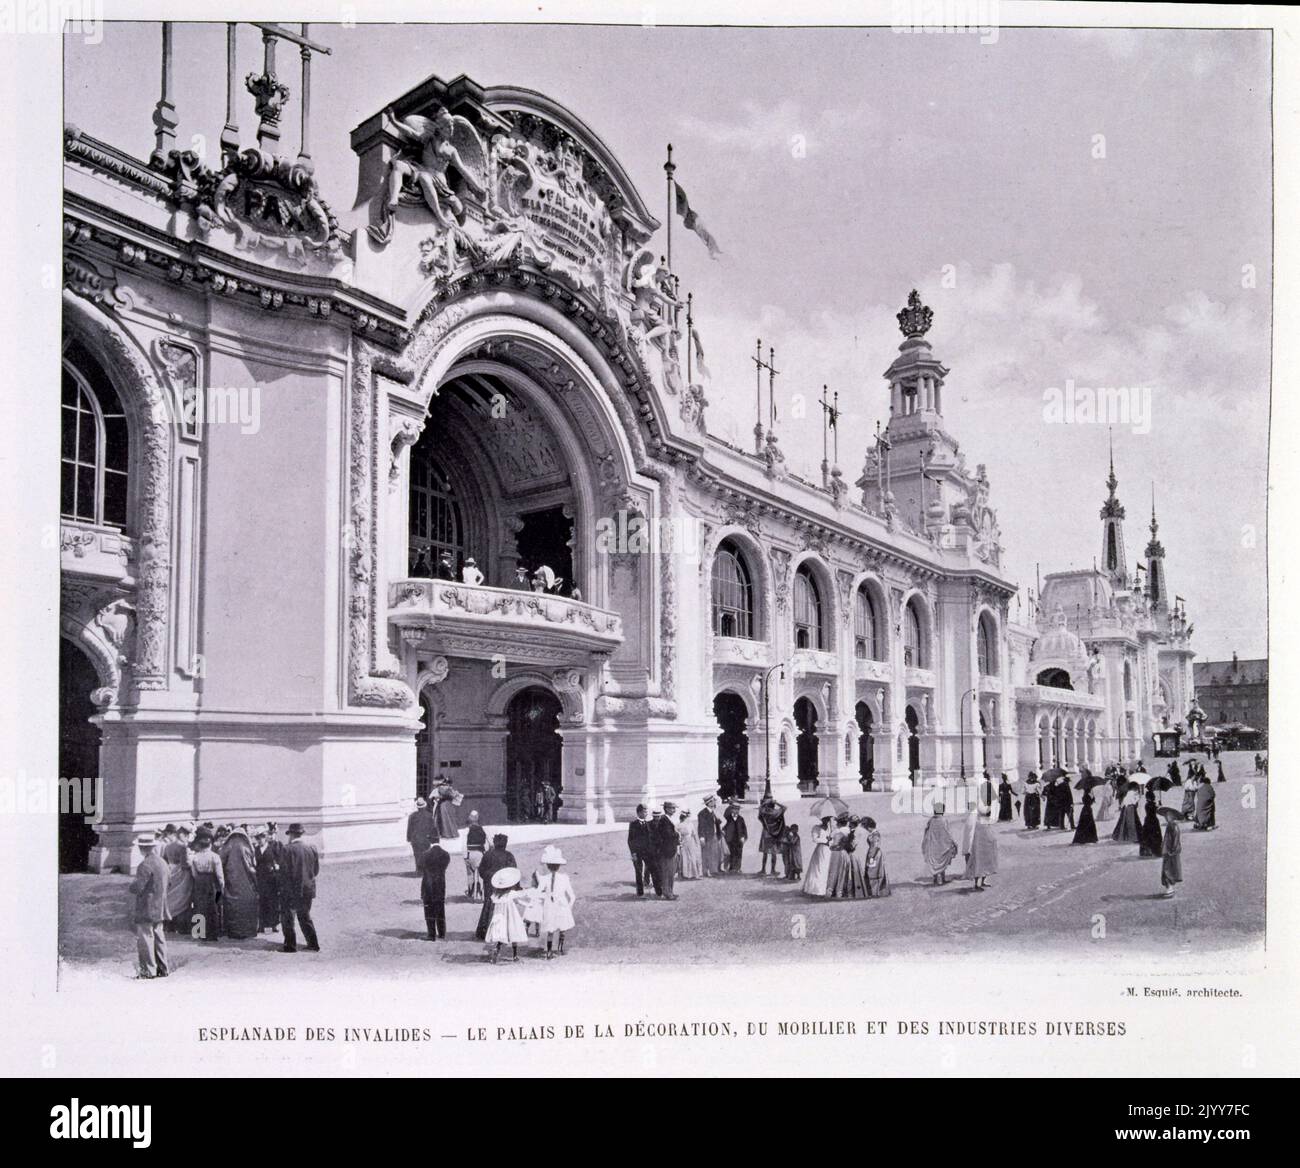 Exposition Universelle (World Fair) Paris, 1900; black and white photograph; L'Esplanade des Invalides; the Palace of Decorative Arts, Furniture and Crafts. Stock Photo